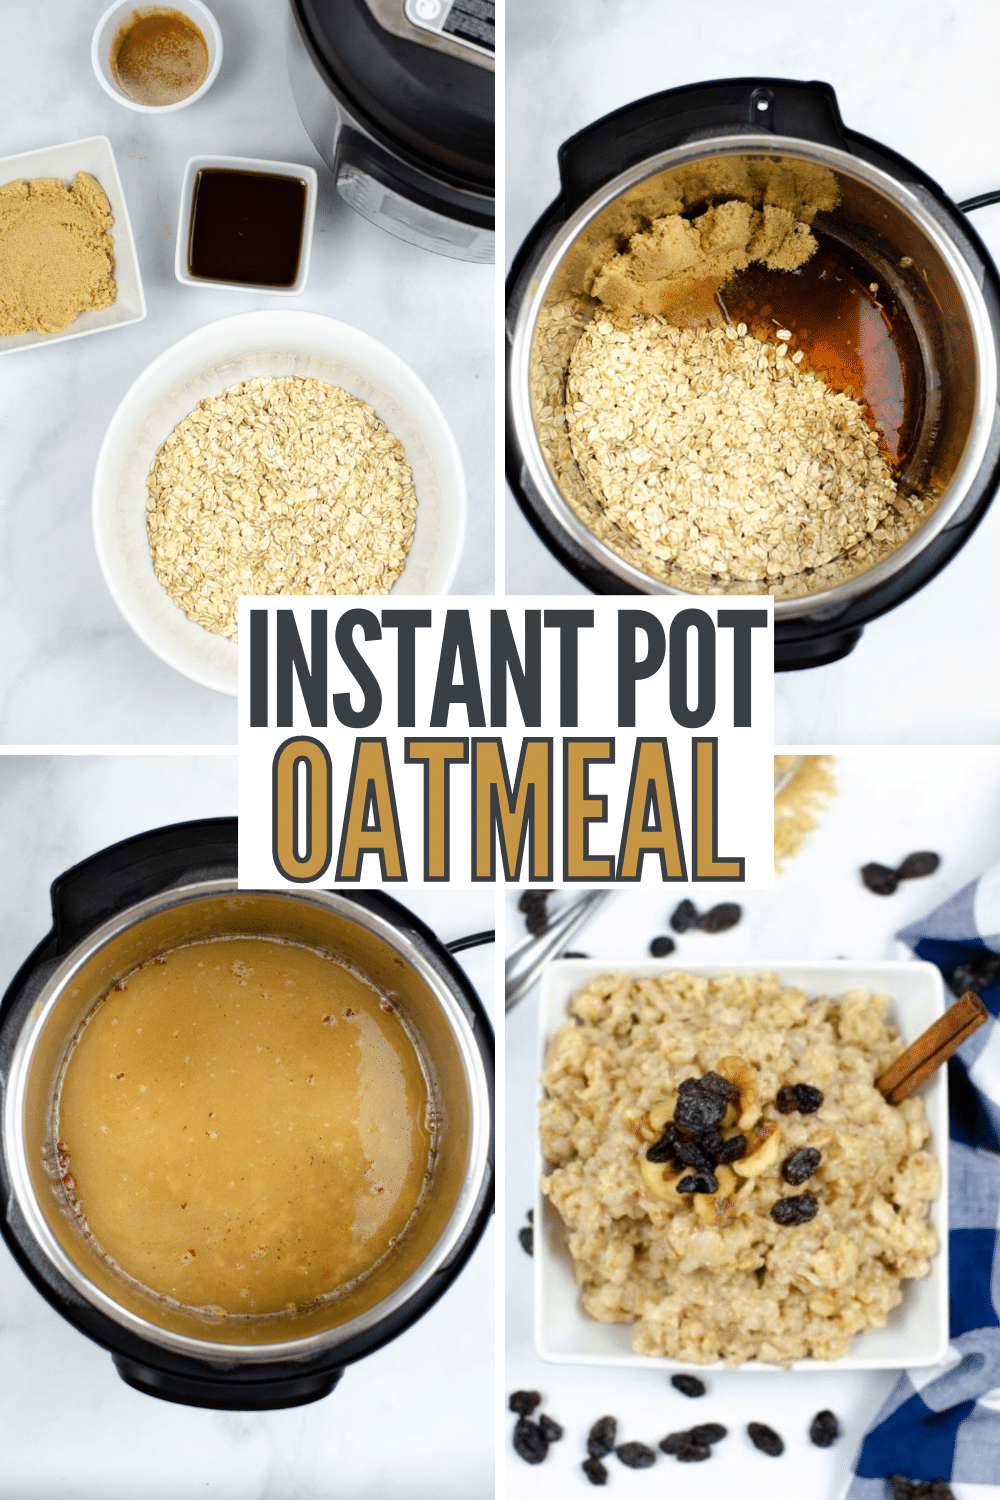 Instant Pot Oatmeal is perfect for busy mornings! This easy recipe cooks while you get ready for the day, making your morning less stressful. #instantpot #pressurecooker #oatmeal #breakfast #recipe via @wondermomwannab